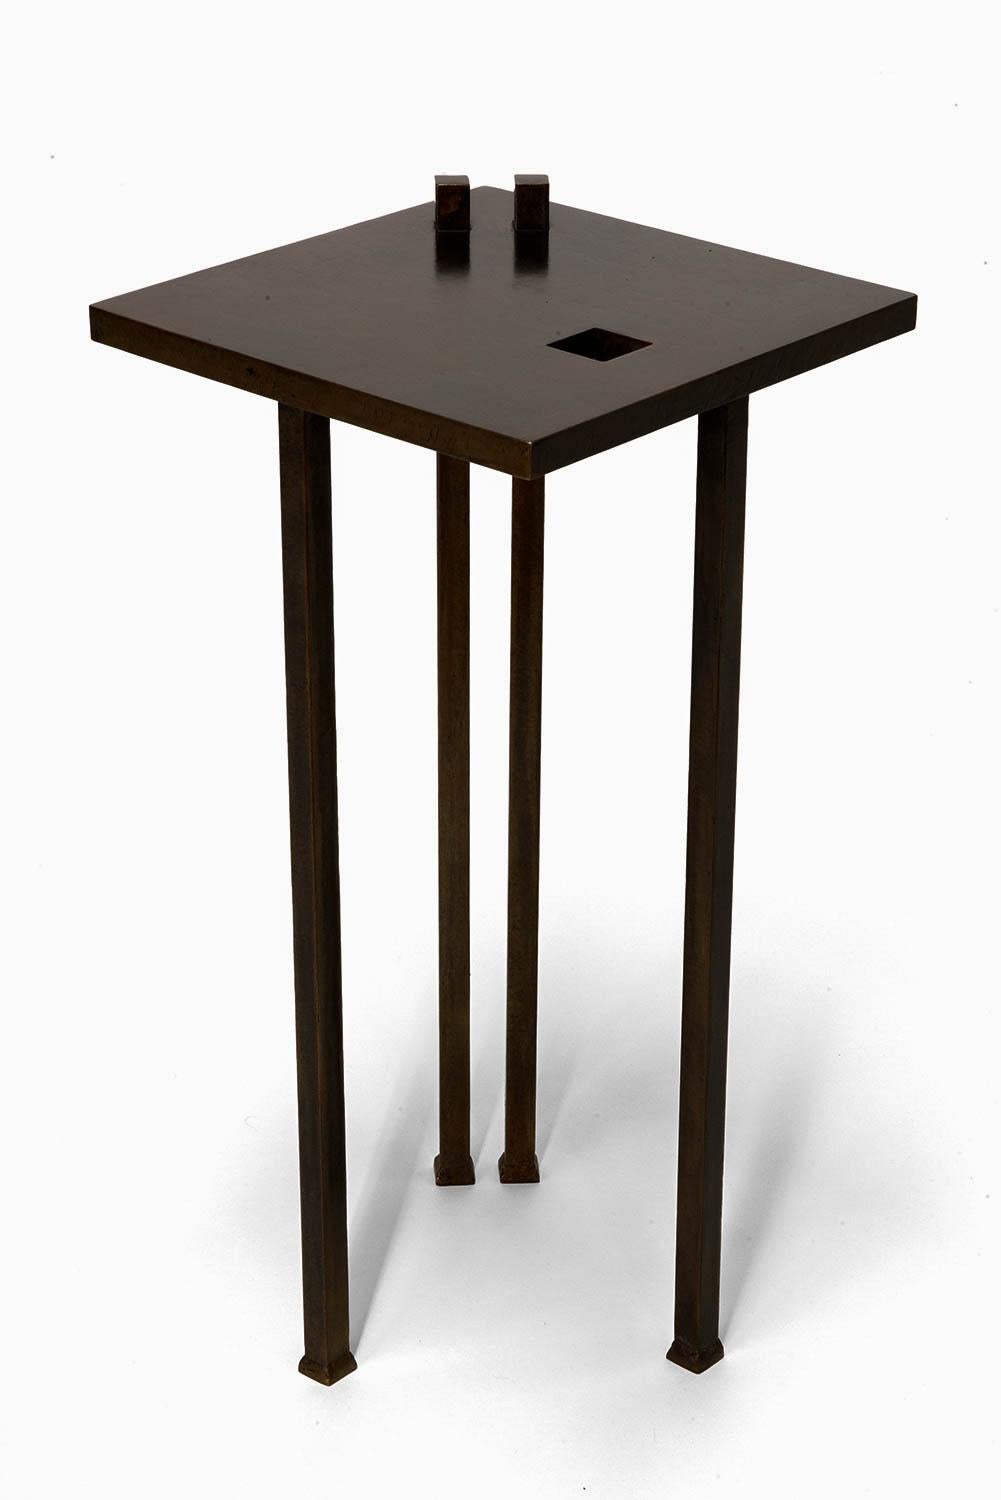 Cigar Table by Cal Summers
Dimension:  D 30.48 x H 60.96 cm
Materials: Sculpted Steel with Bronze Patina and Waxed finish.

Cal Summers is a British designer who makes bespoke handmade furniture and contemporary artefacts in which he challenges the